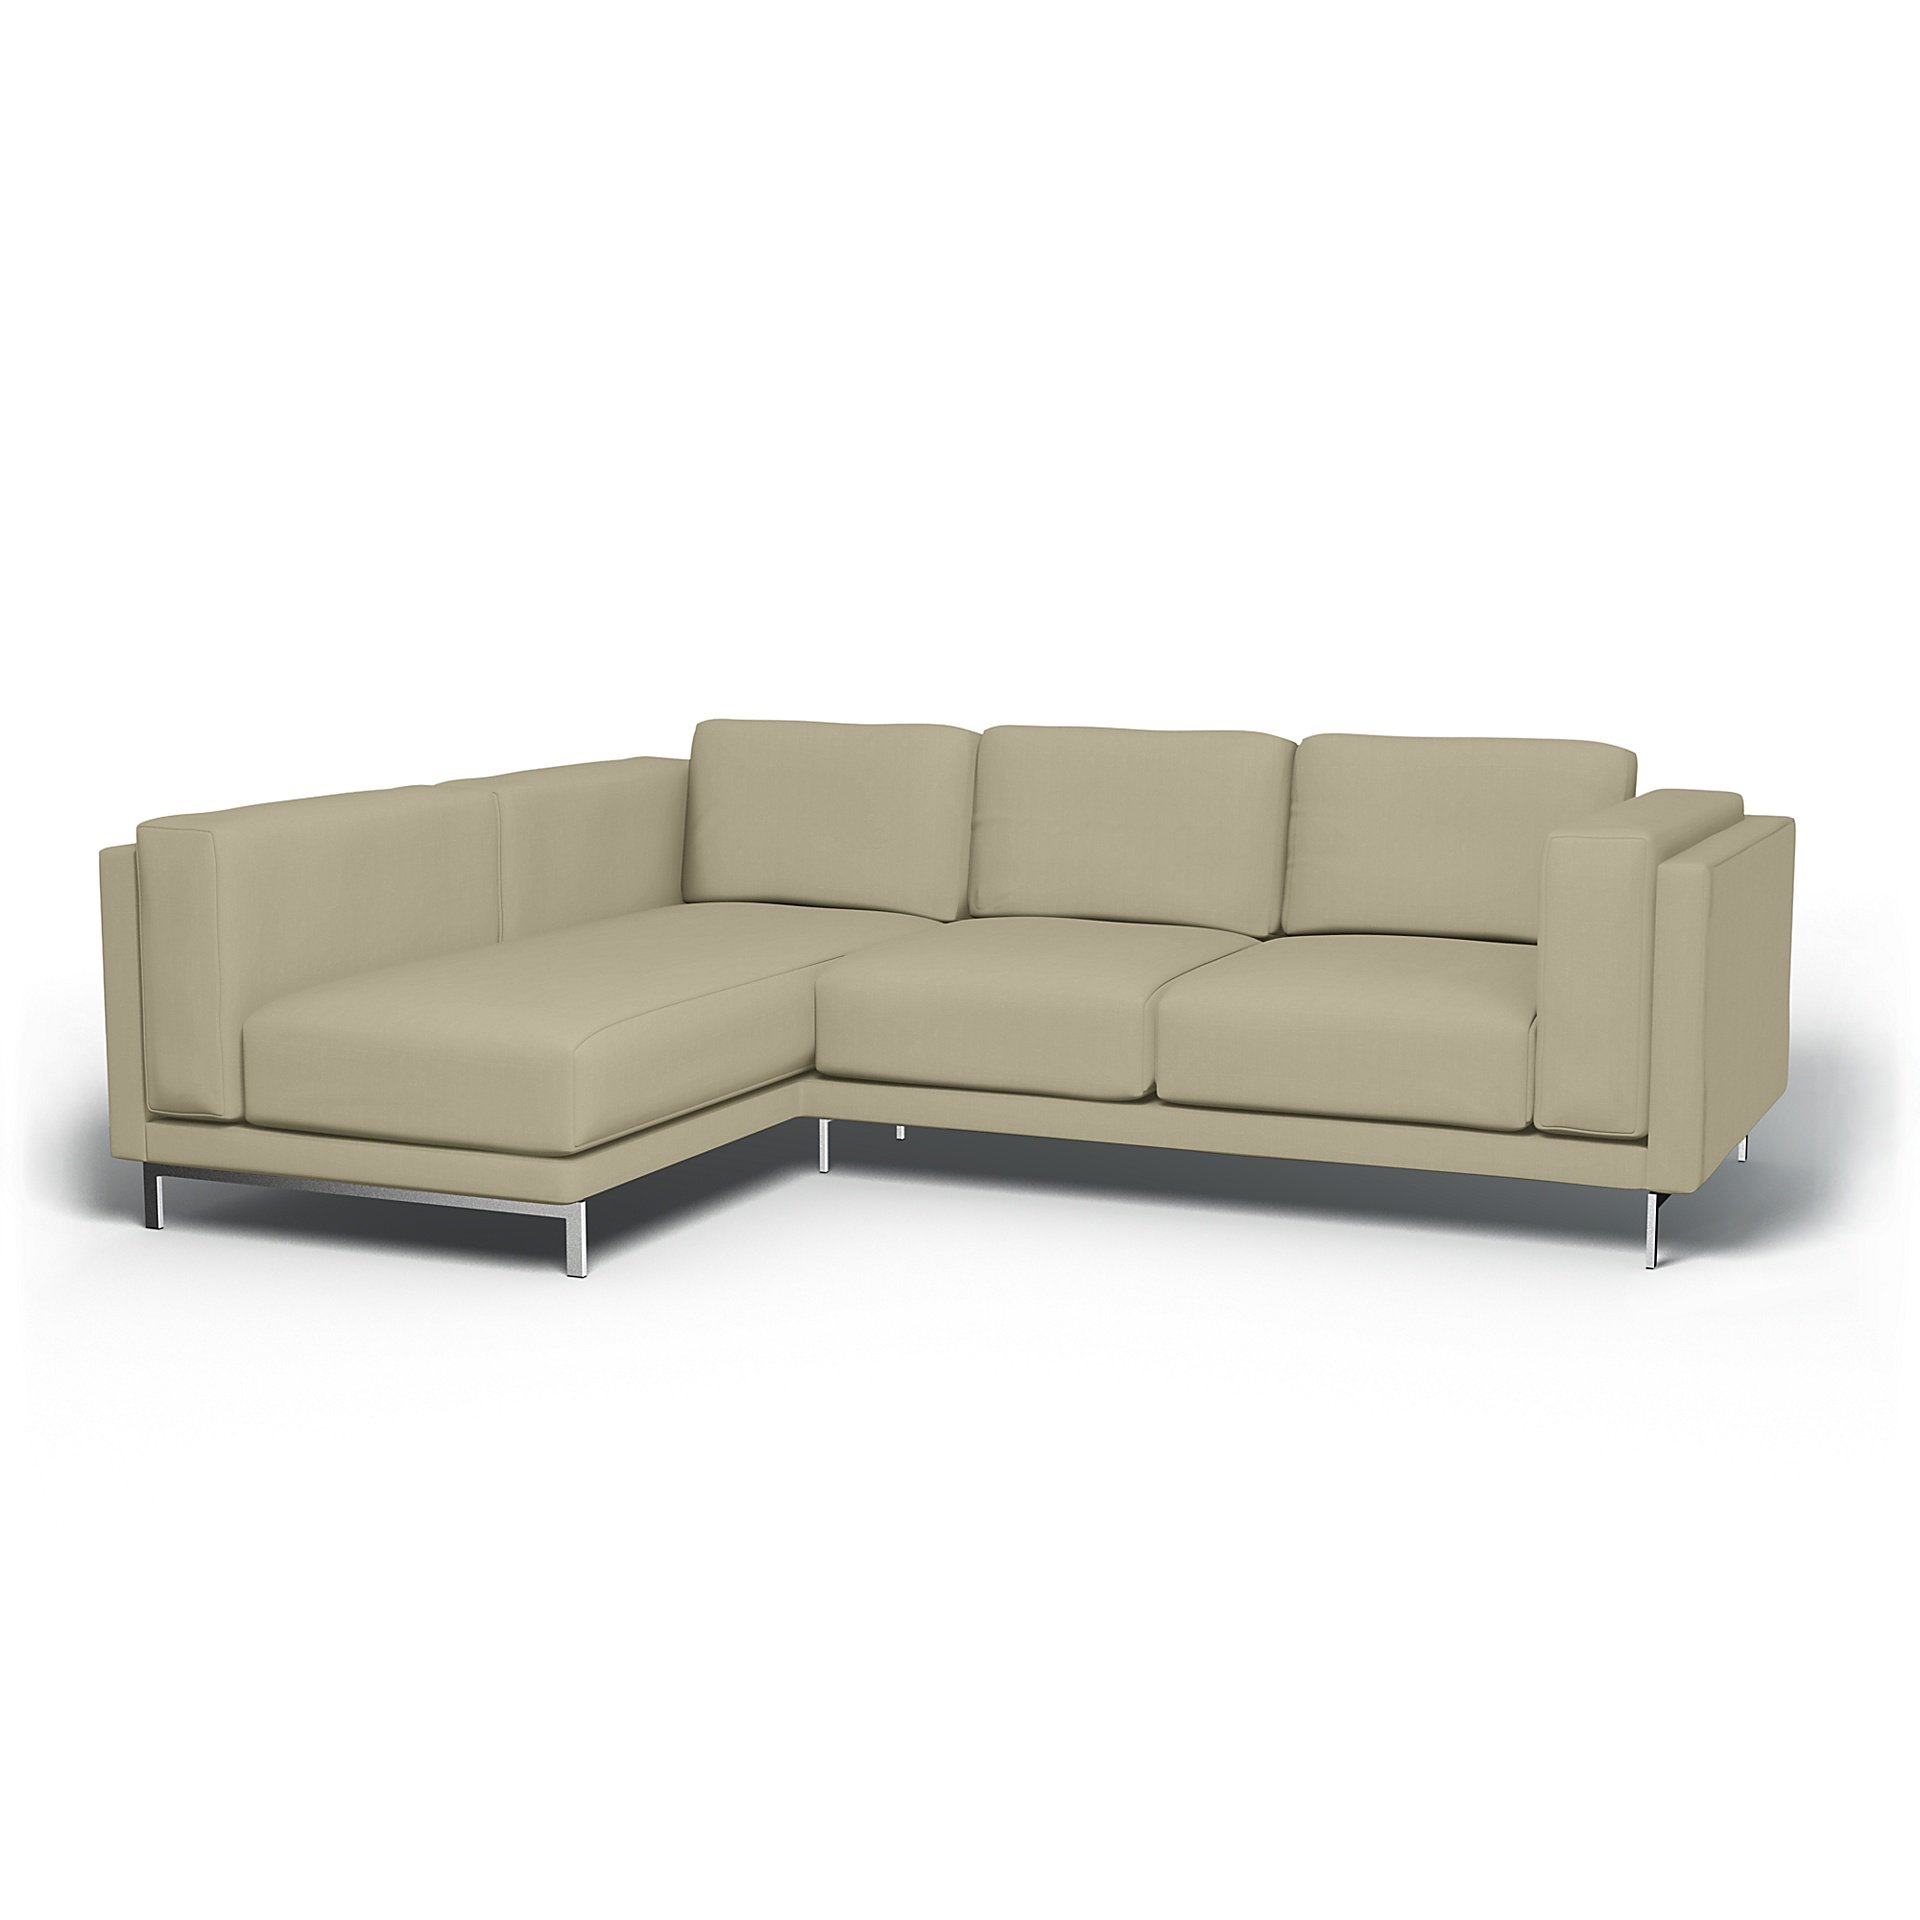 IKEA - Nockeby 3 Seater Sofa with Left Chaise Cover, Sand Beige, Cotton - Bemz